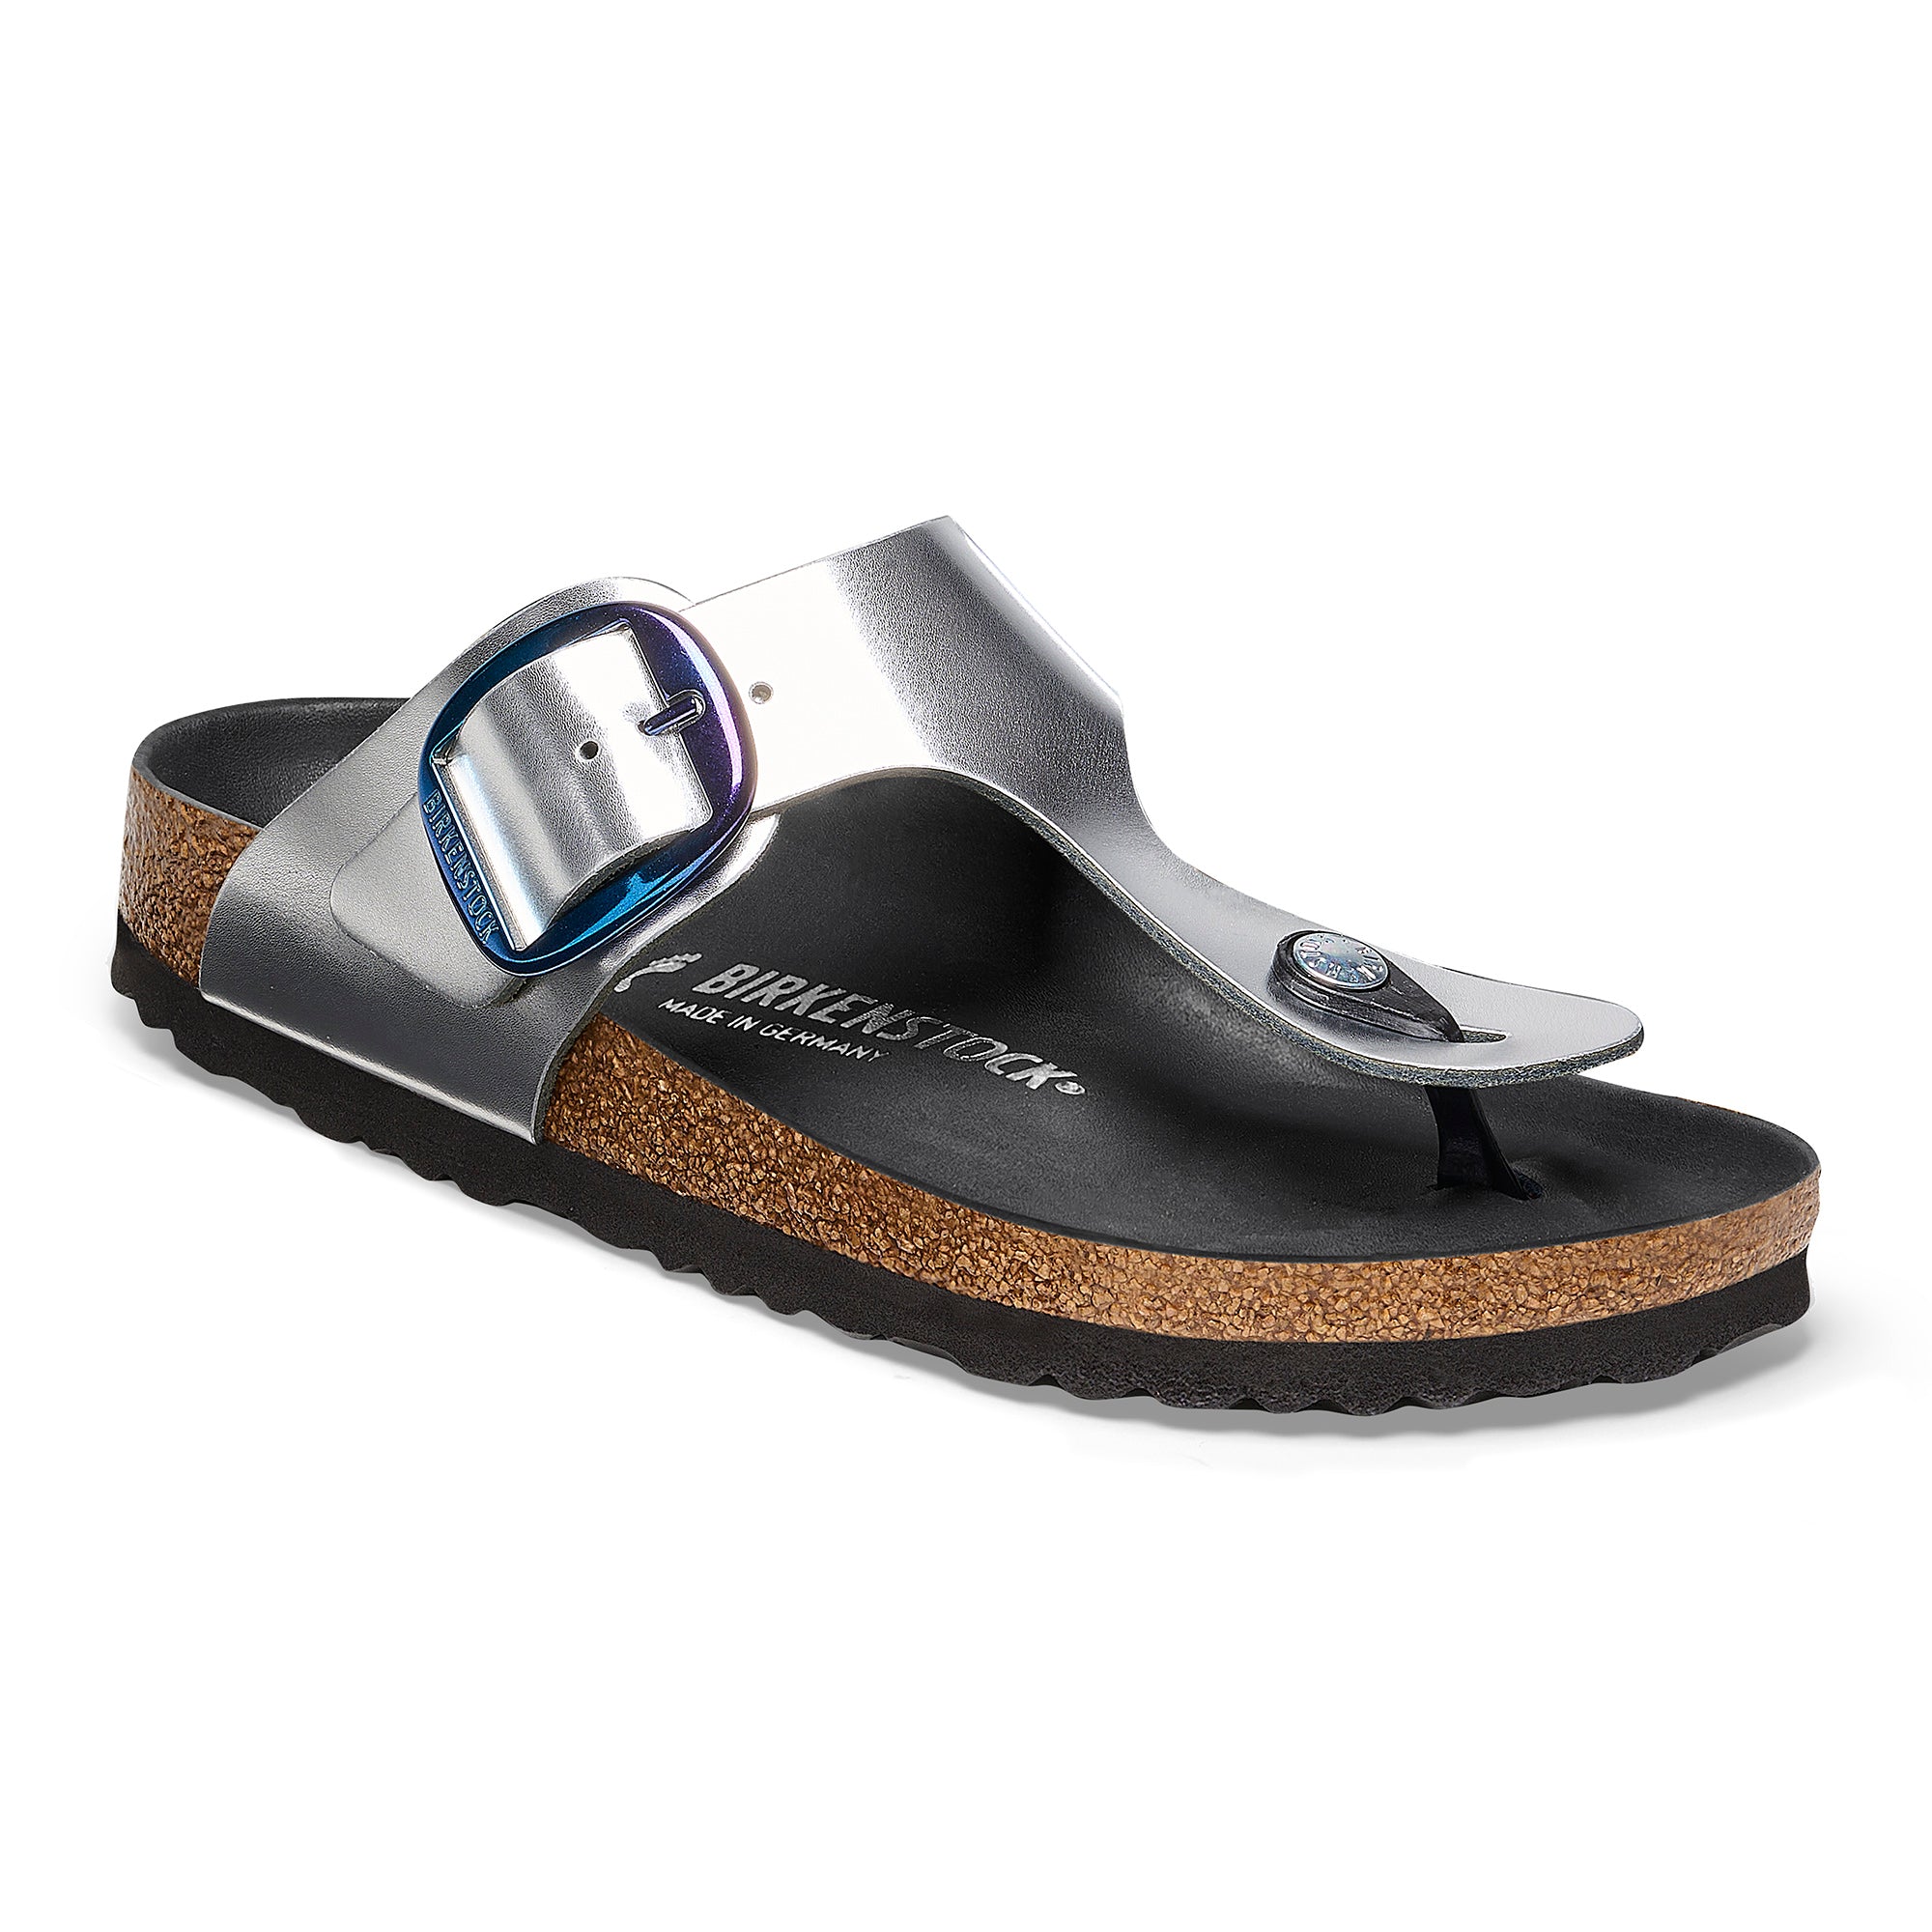 Birkenstock Limited Edition Gizeh Big Buckle metallic silver leather